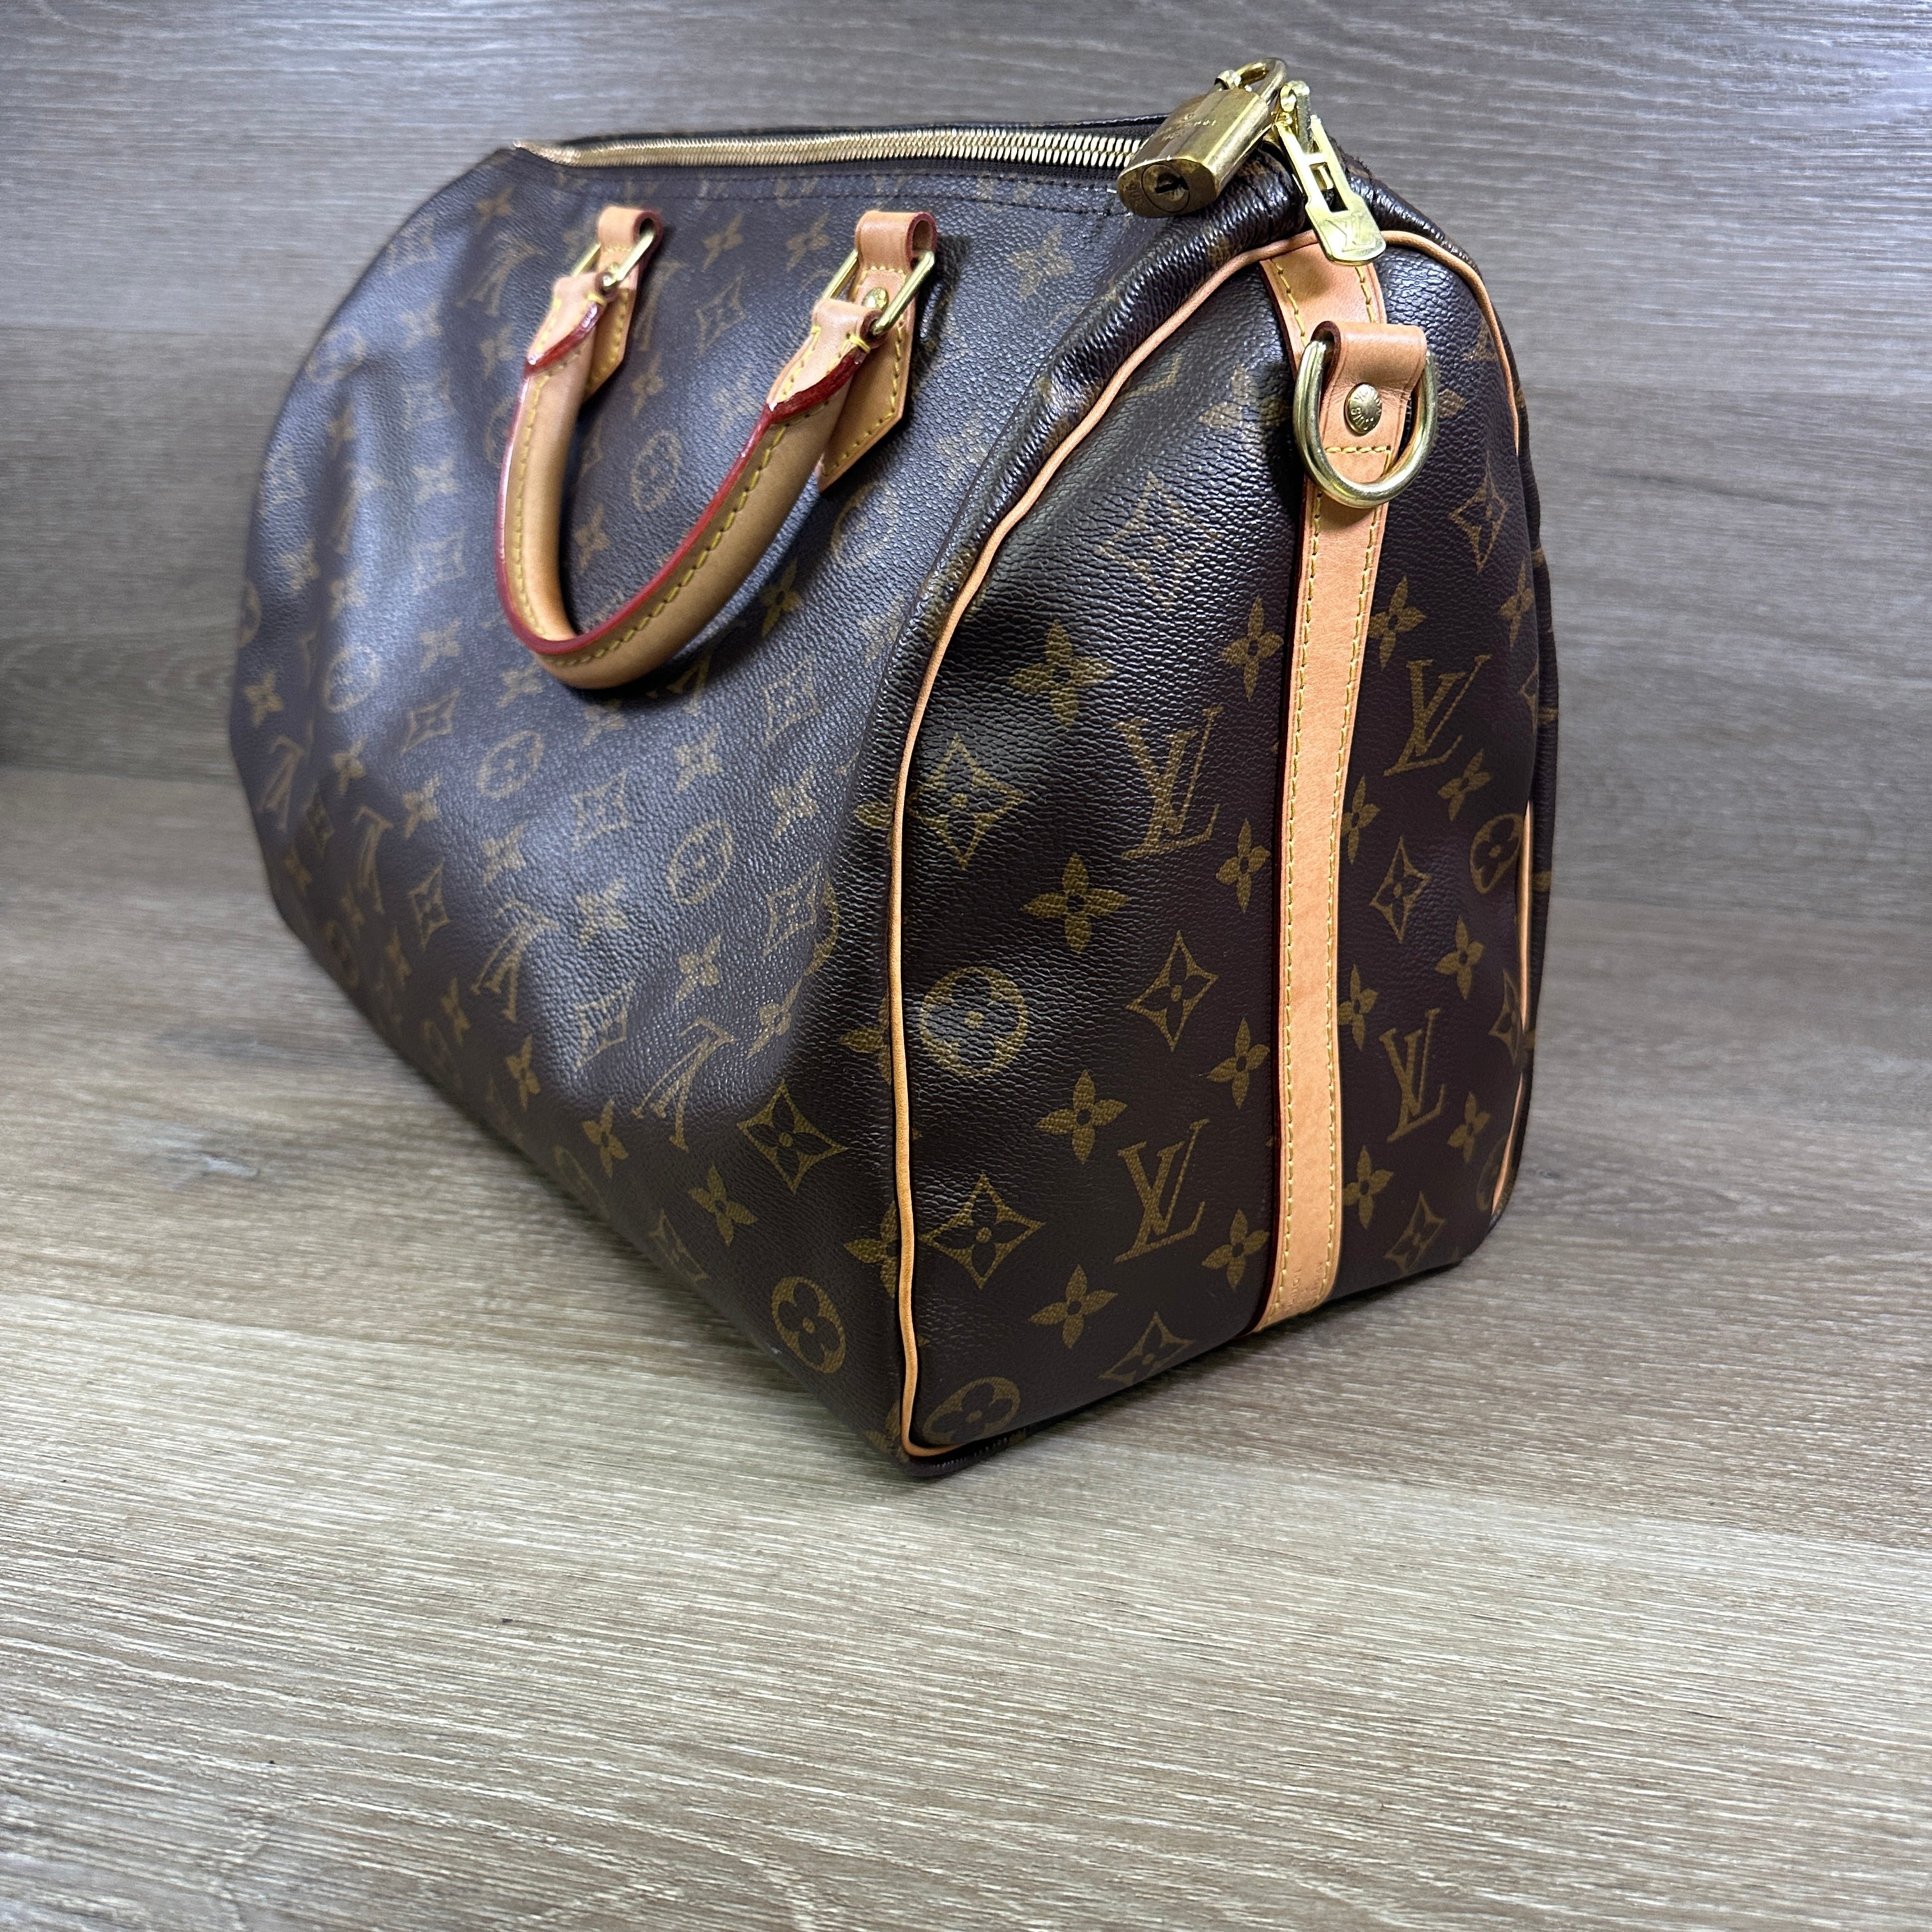 Speedy Bandouliere by Louis Vuitton